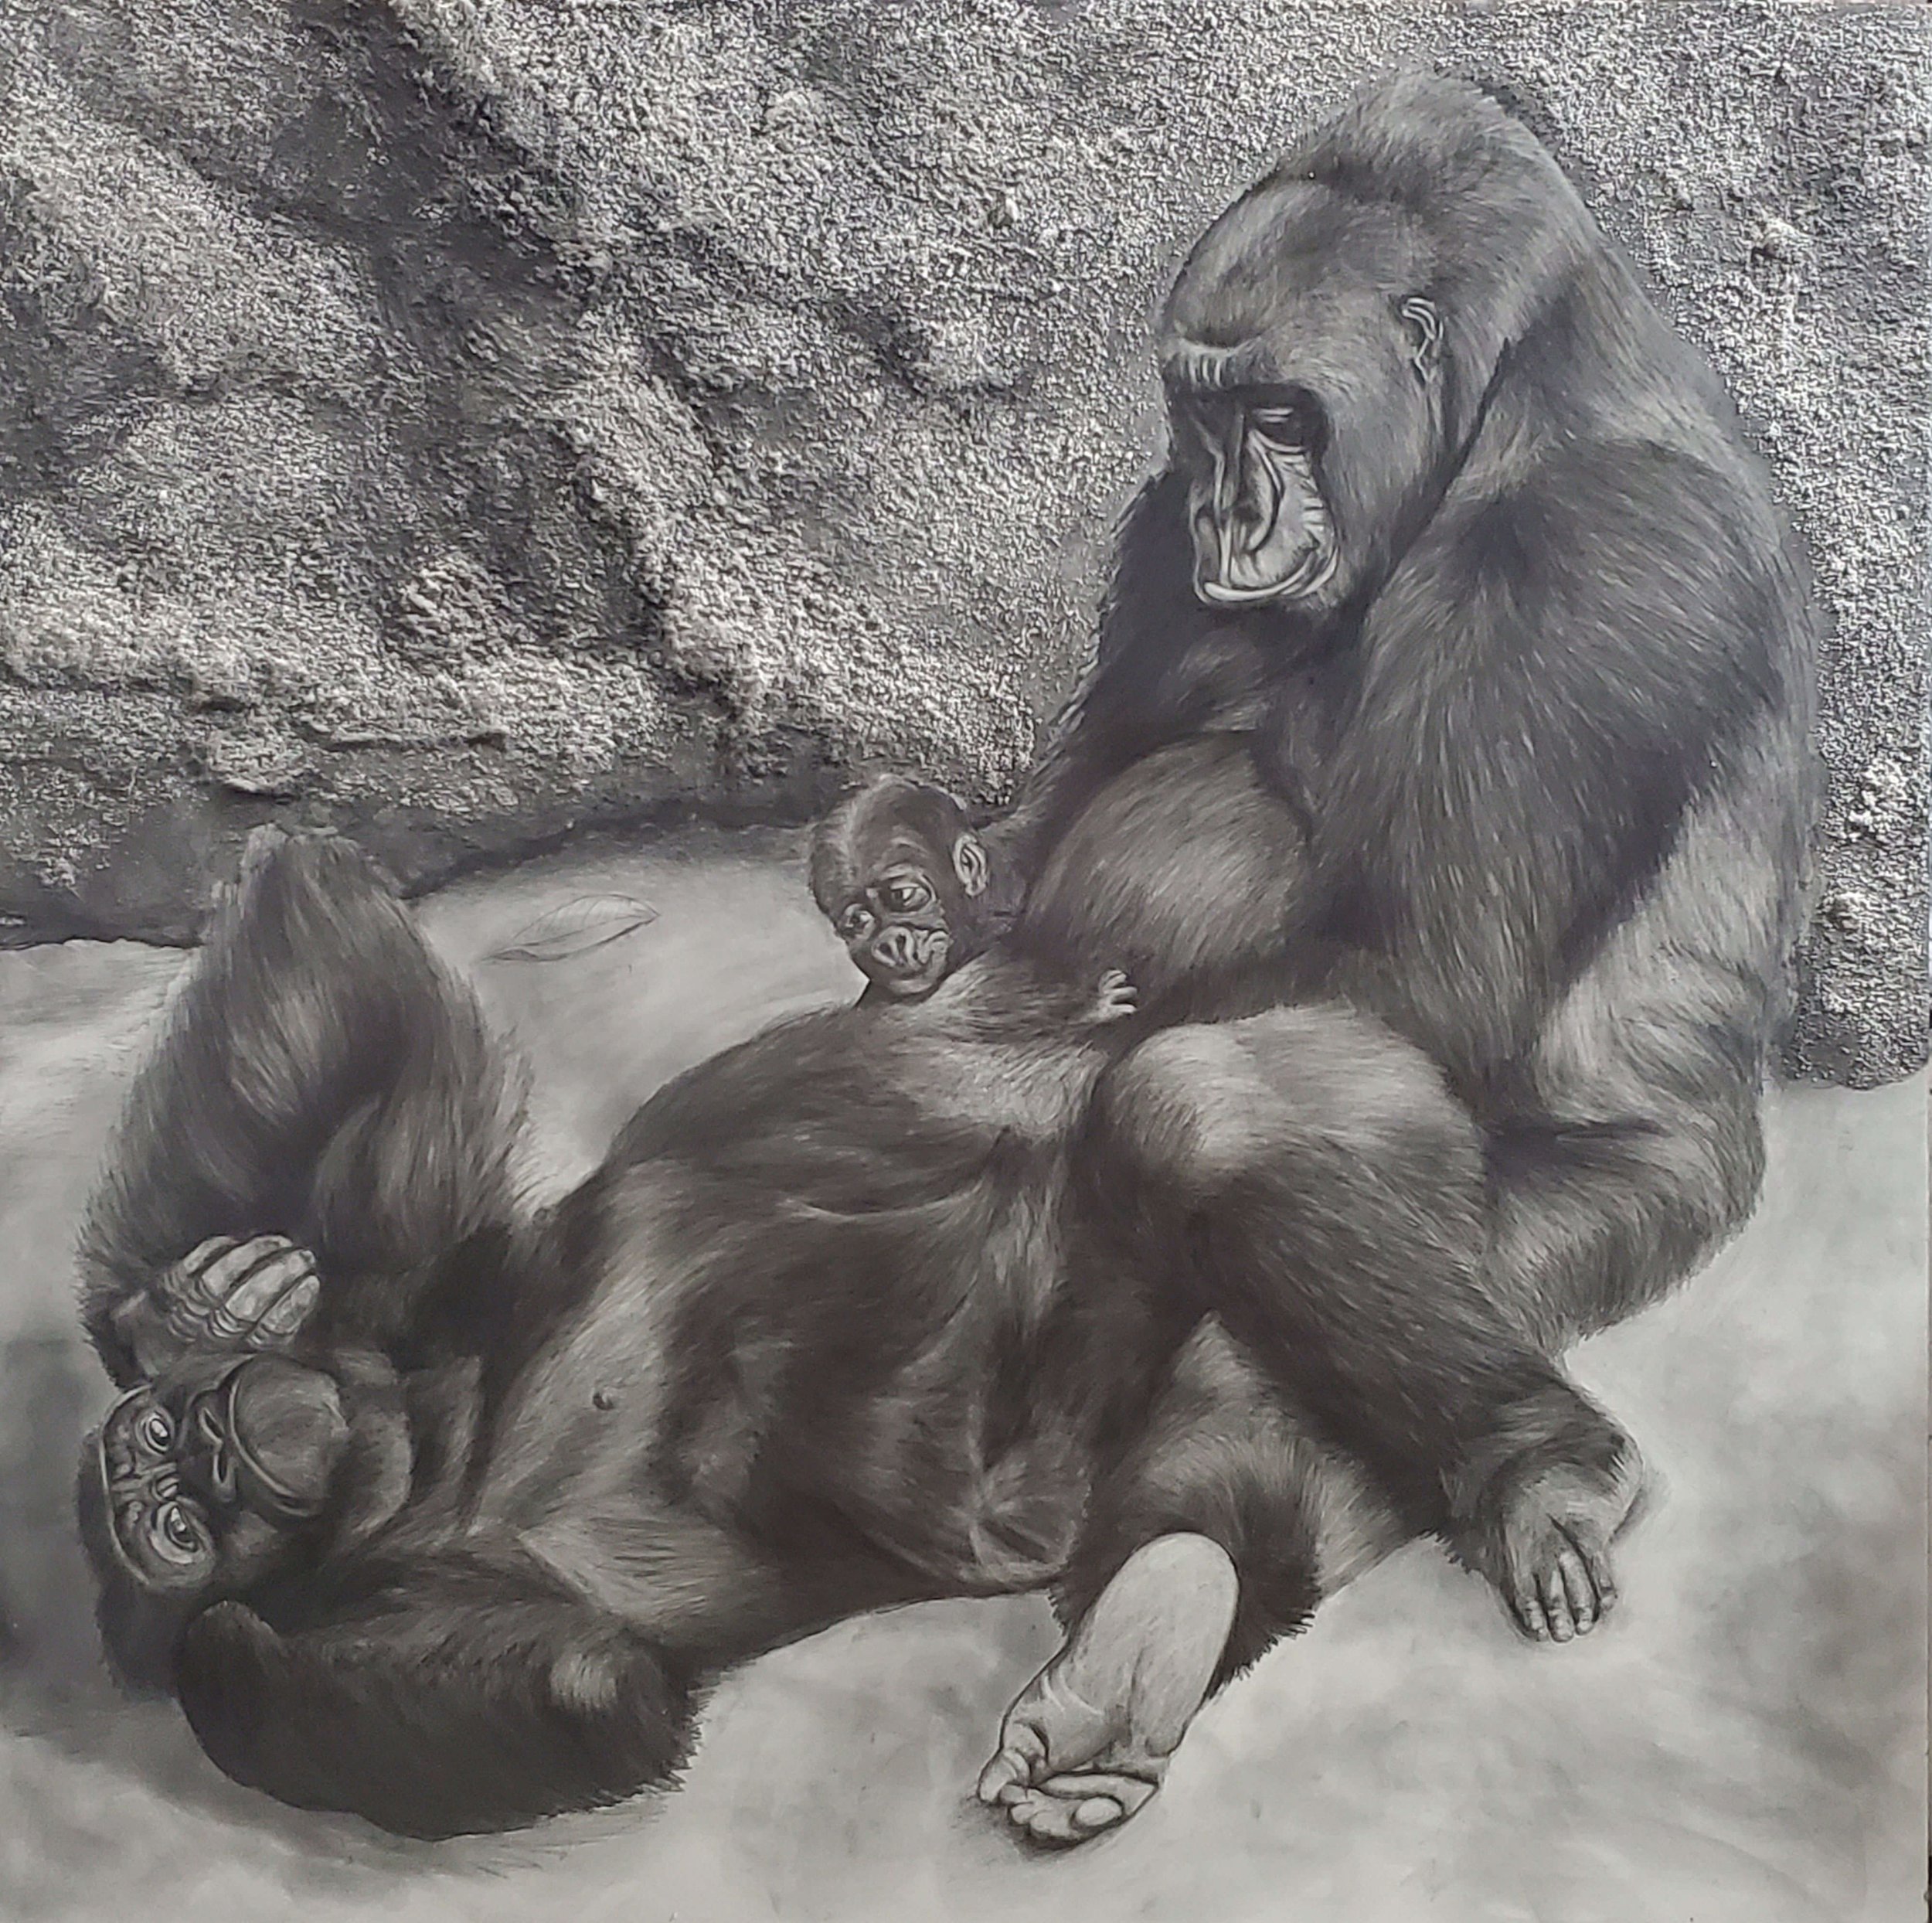 A Maternal Moment. Graphite on cradled Ampersand Claybord © 2021 Patsy Lindamood. All Rights Reserved.